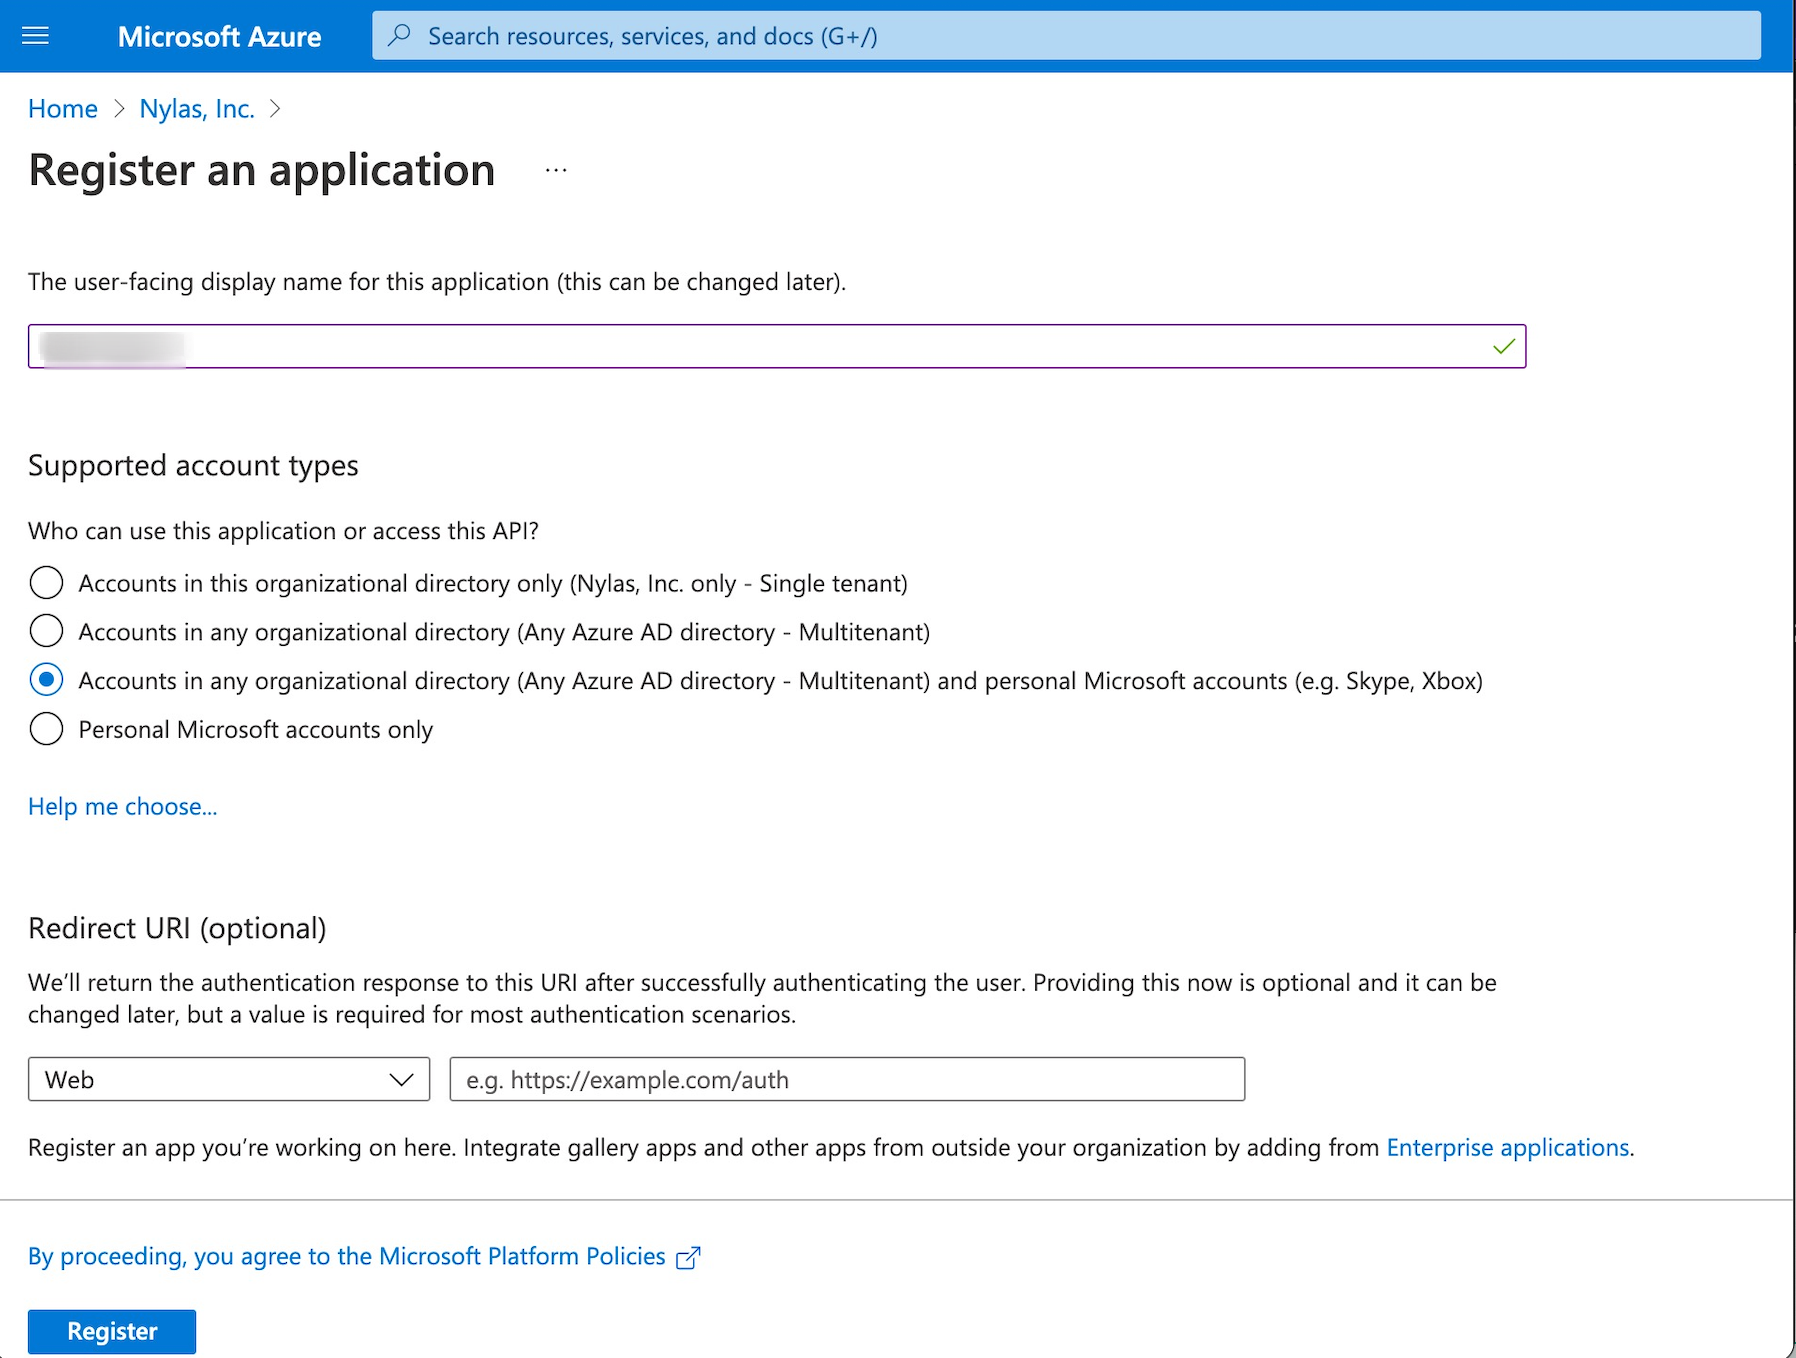 The Microsoft Azure Portal displaying the "Register an application" page. The "Accounts in any organizational directory and personal Microsoft accounts" is selected.